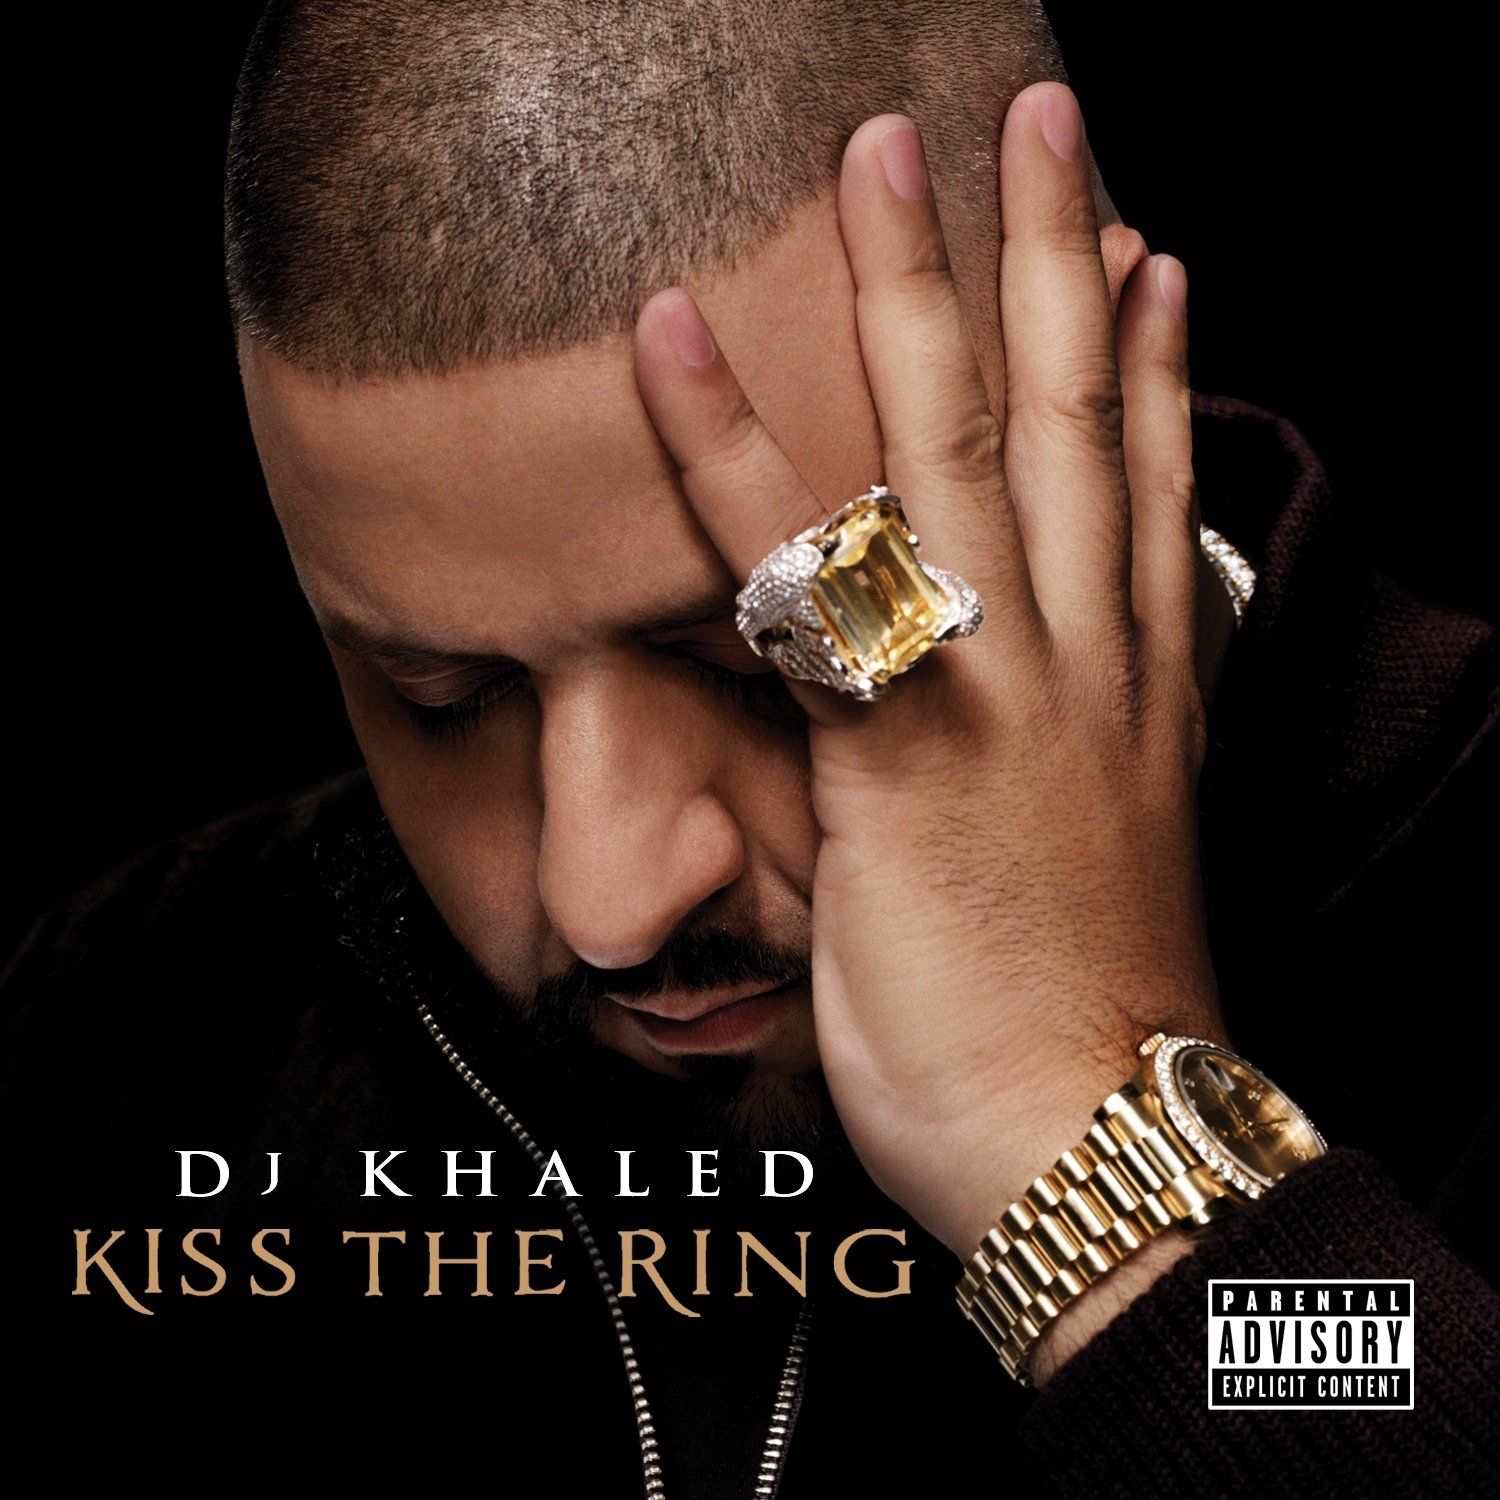 All 13 DJ Khaled Album Covers, Ranked From Worst to Best LEVEL Man